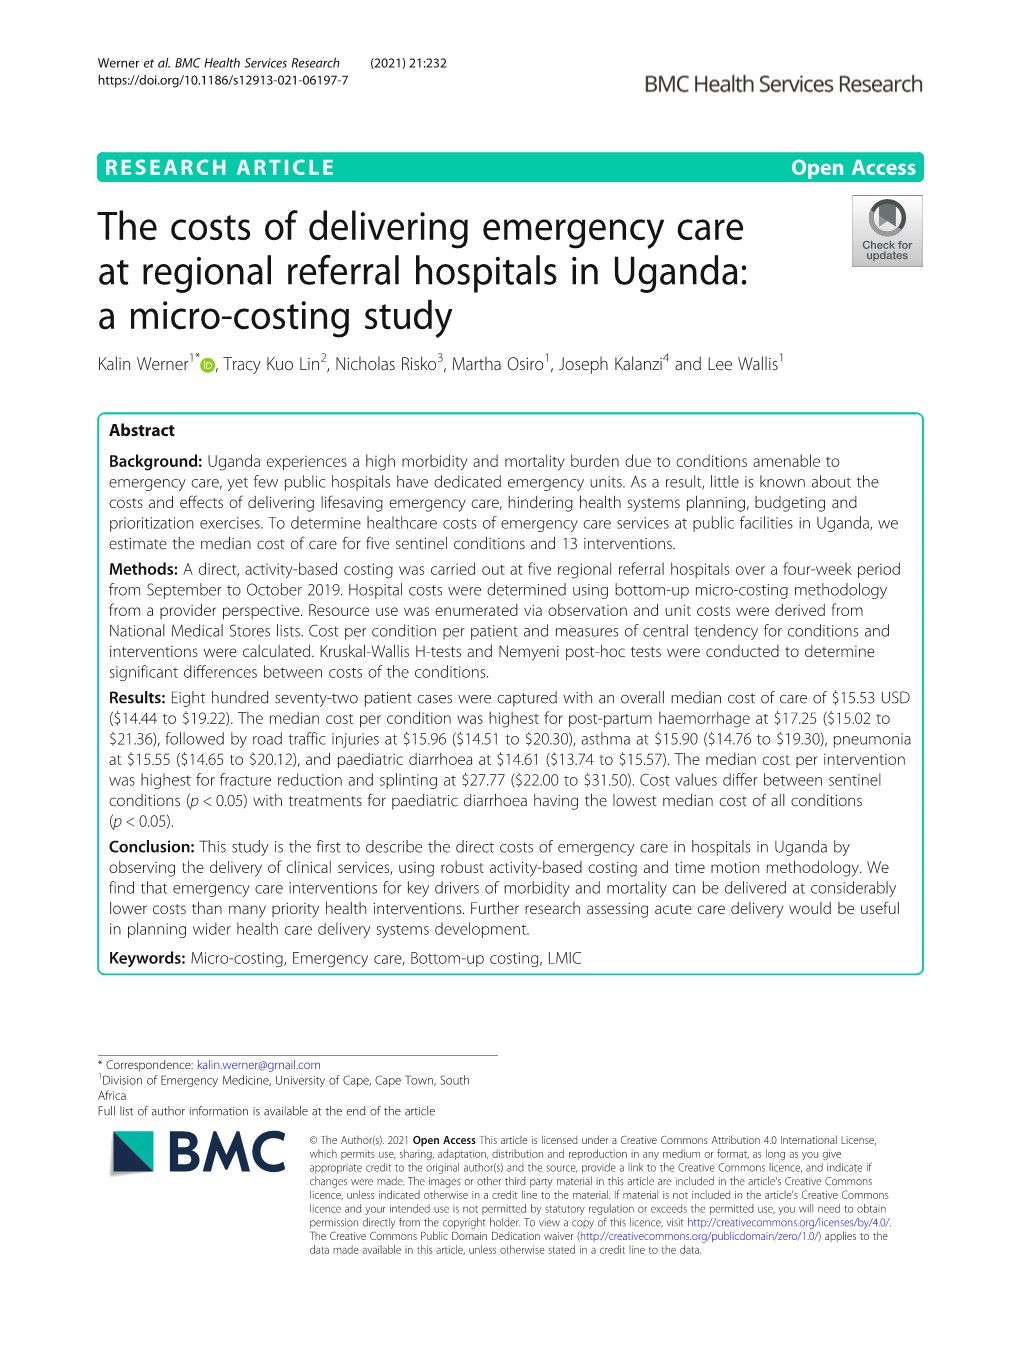 The Costs of Delivering Emergency Care at Regional Referral Hospitals In